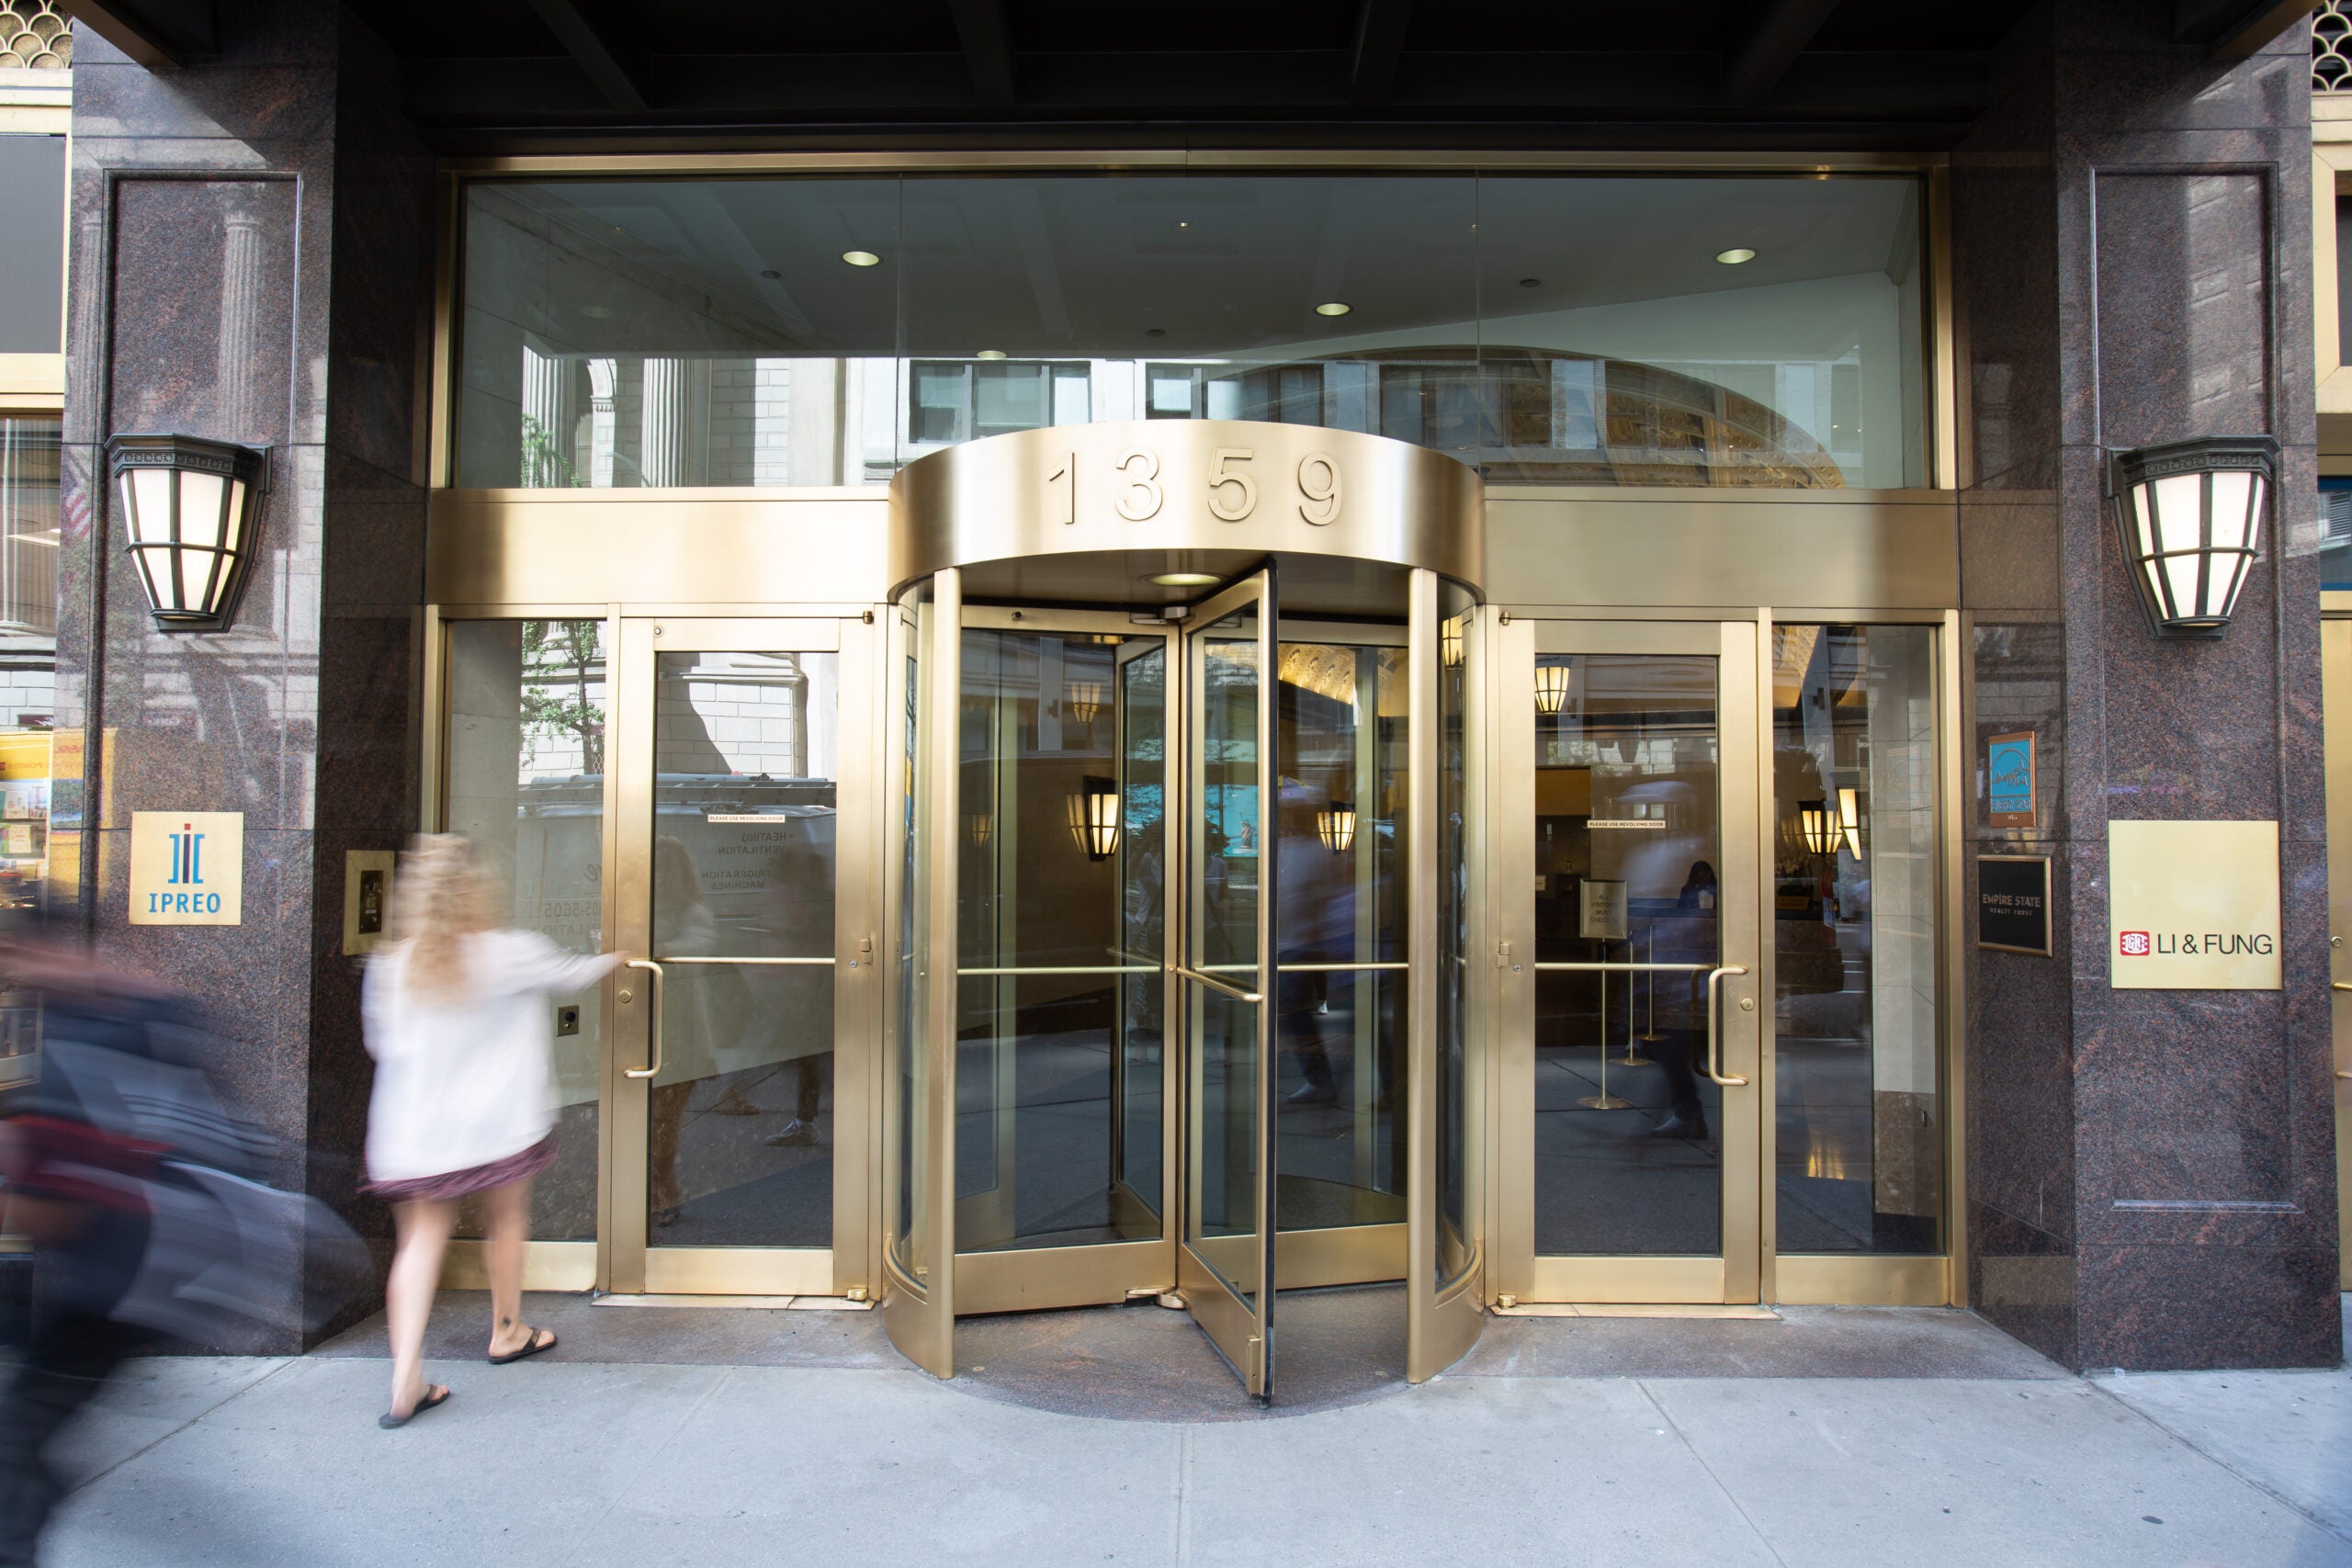 At 1359 Broadway, Progyny has a collaborative office space for its employees.